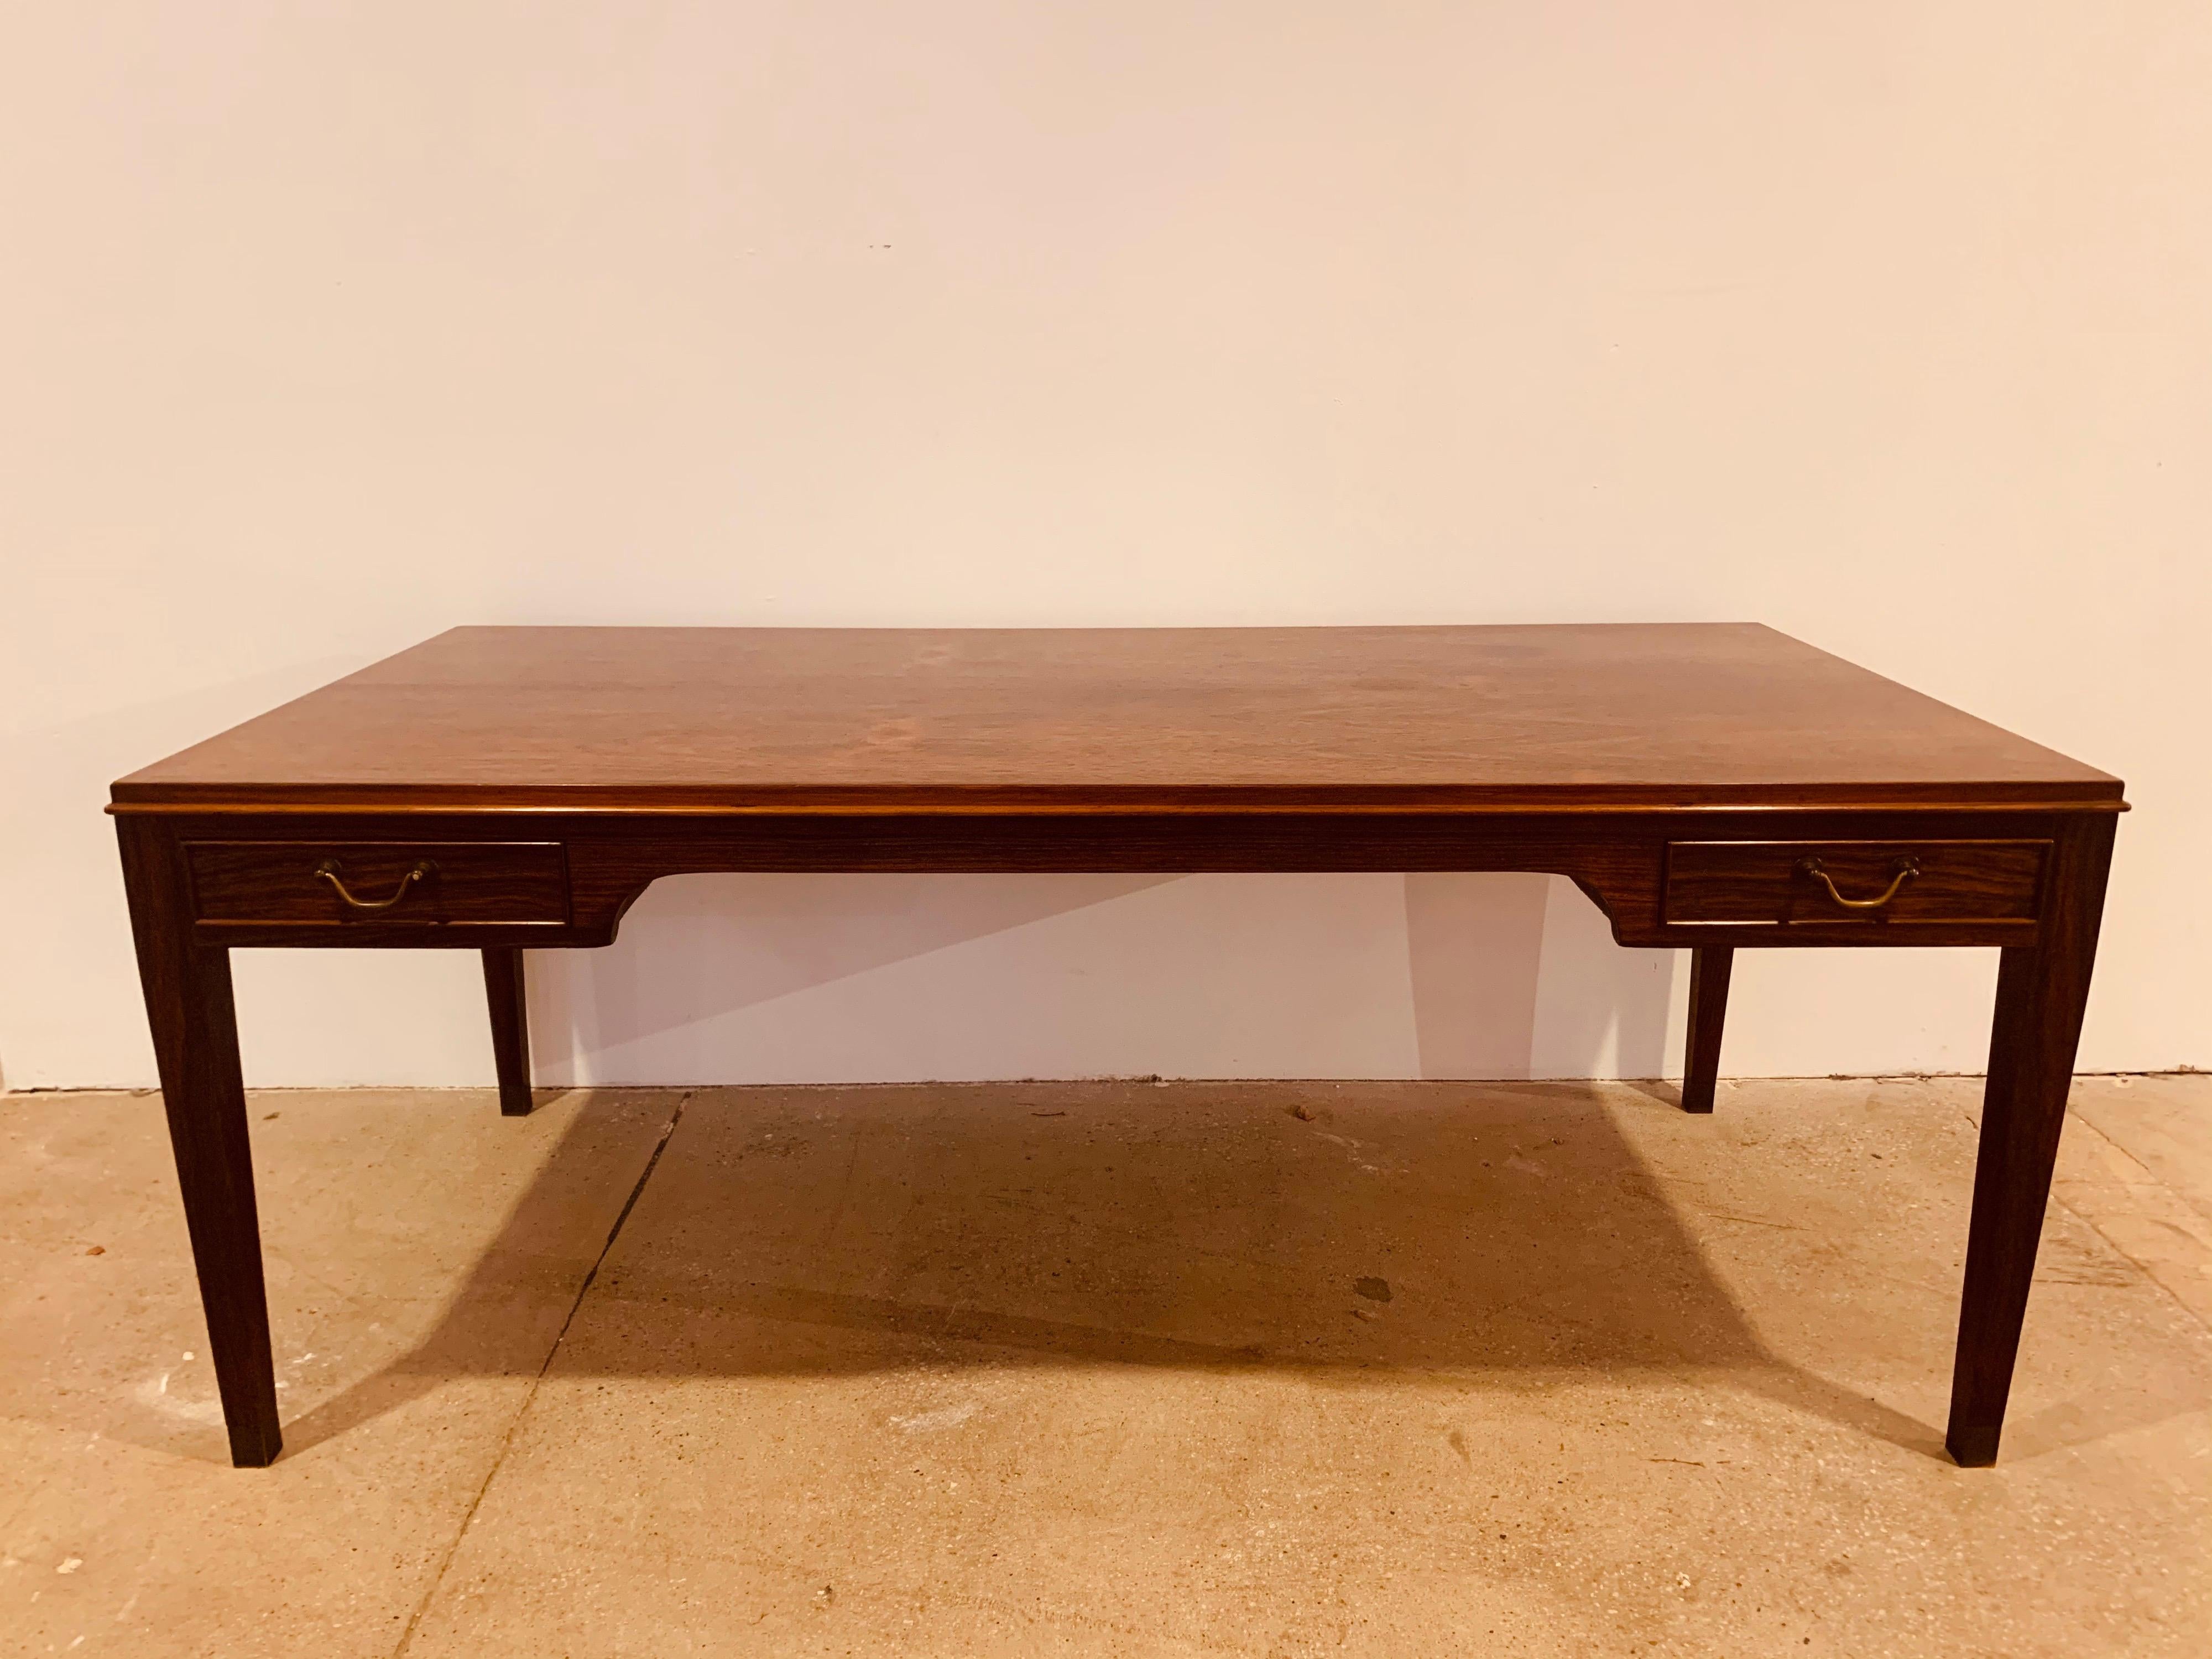 A beautiful classic 1960s Danish rosewood coffee table with 4 drawers and aged brass pulls.